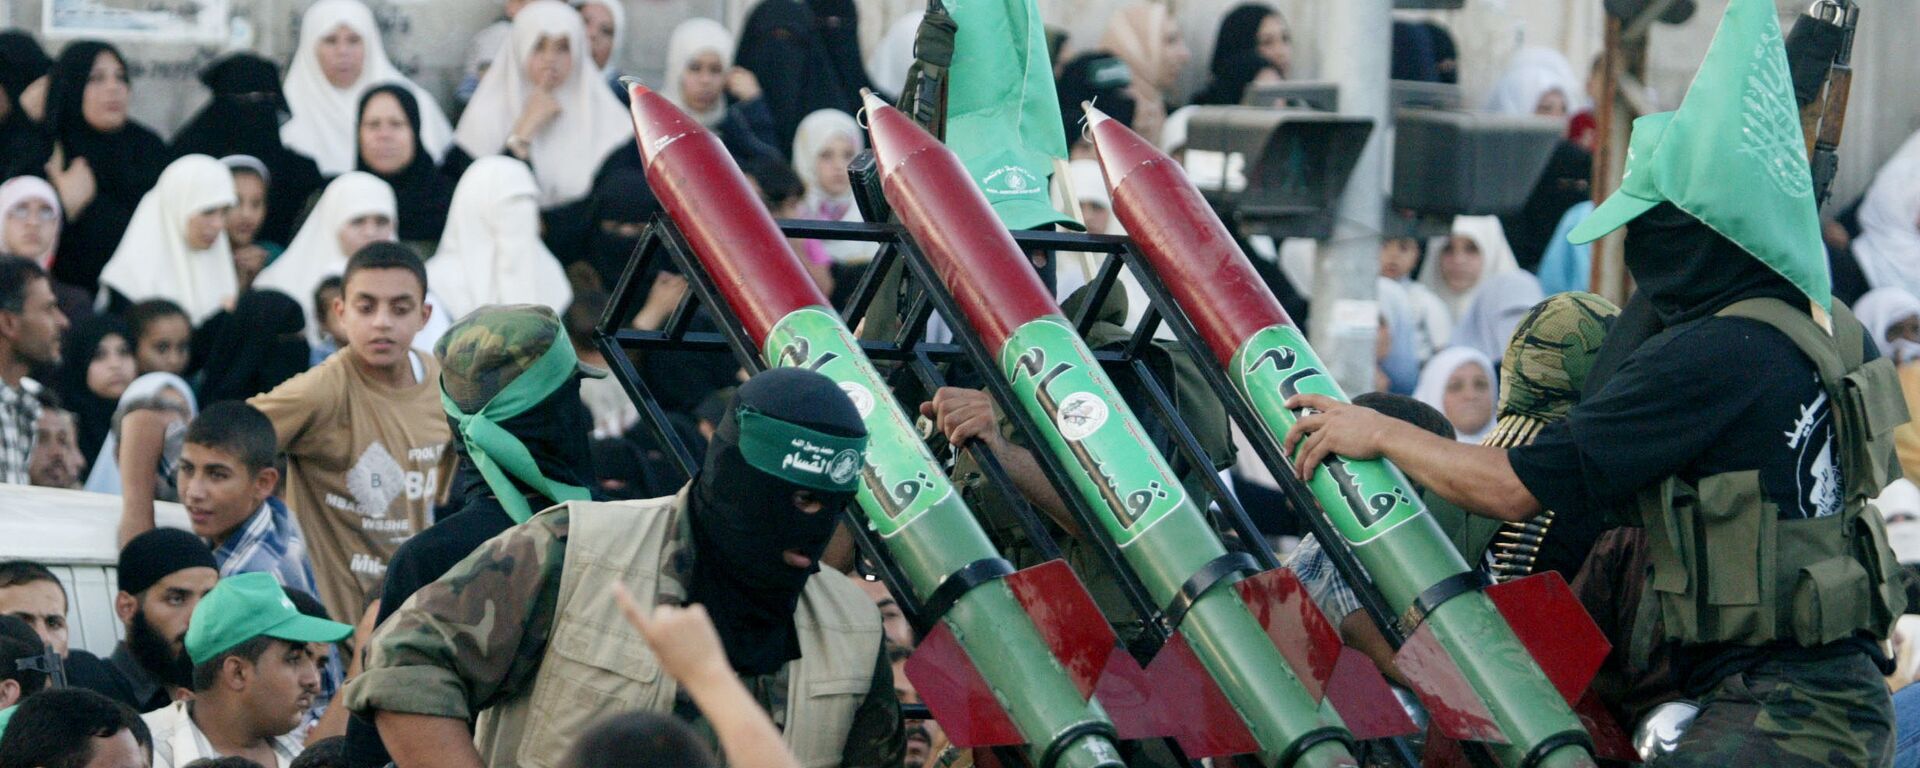 Masked Palestinian Hamas militants display their weapons during a parade in Gaza City. File photo. - Sputnik International, 1920, 15.05.2021